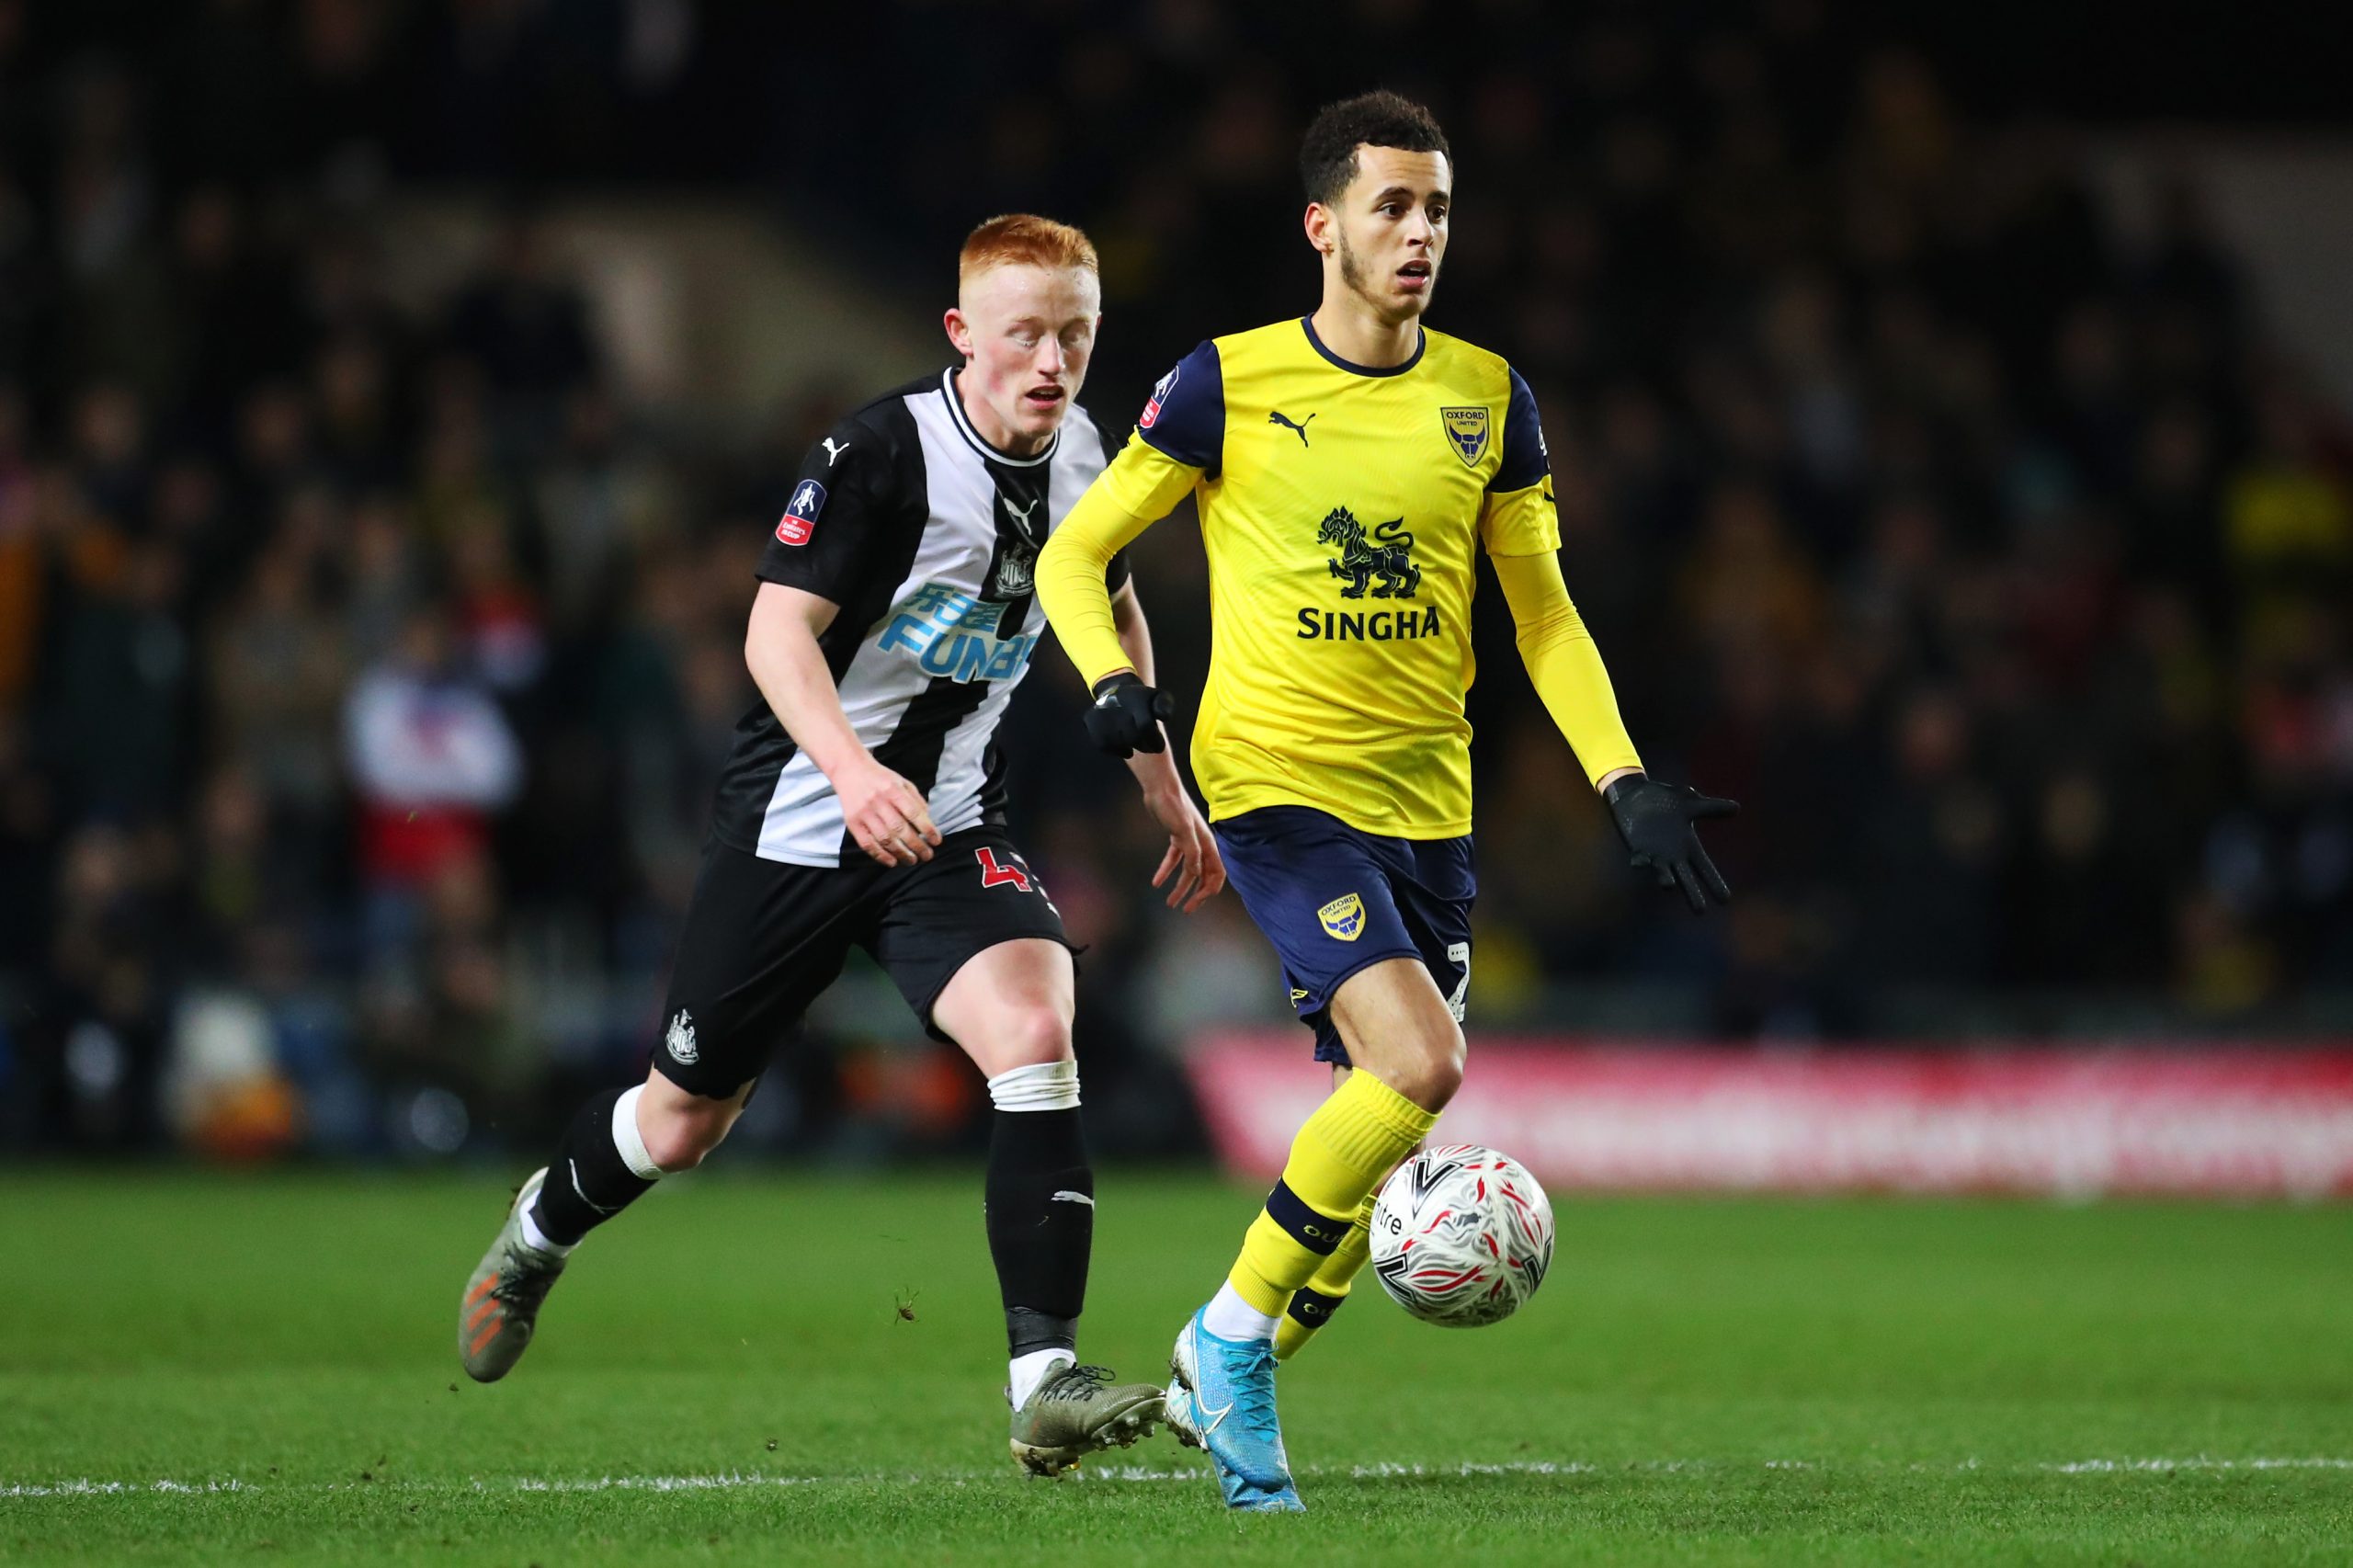 On-loan West Ham winger Nathan Holland playing for Oxford United in the FA Cup match against Newcastle United in February.